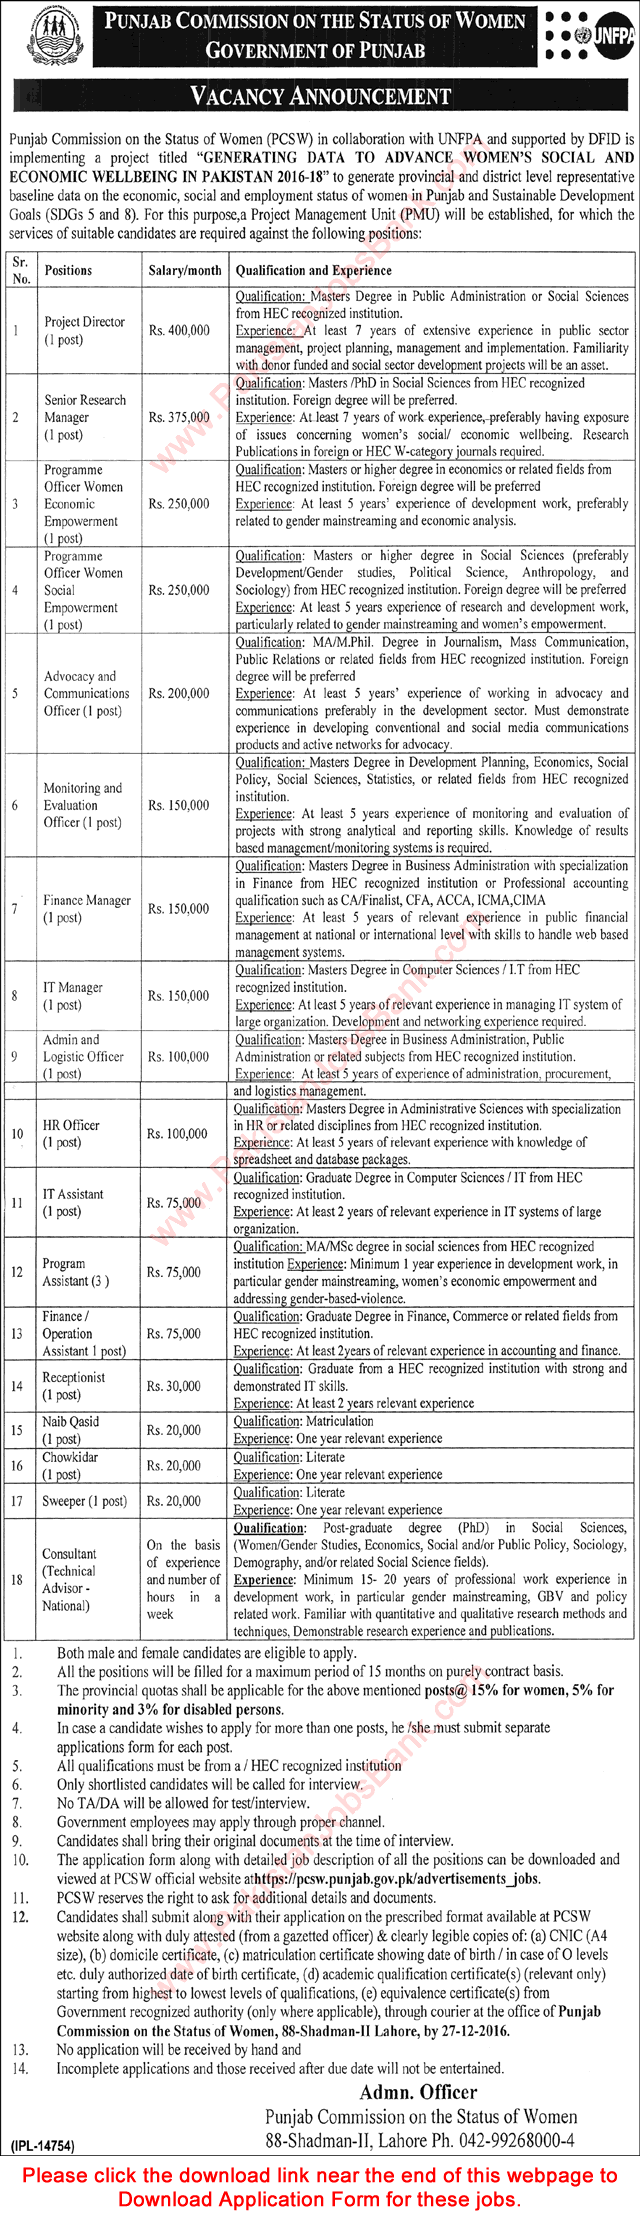 Punjab Commission on the Status of Women Lahore Jobs 2016 December Application Form Download Latest